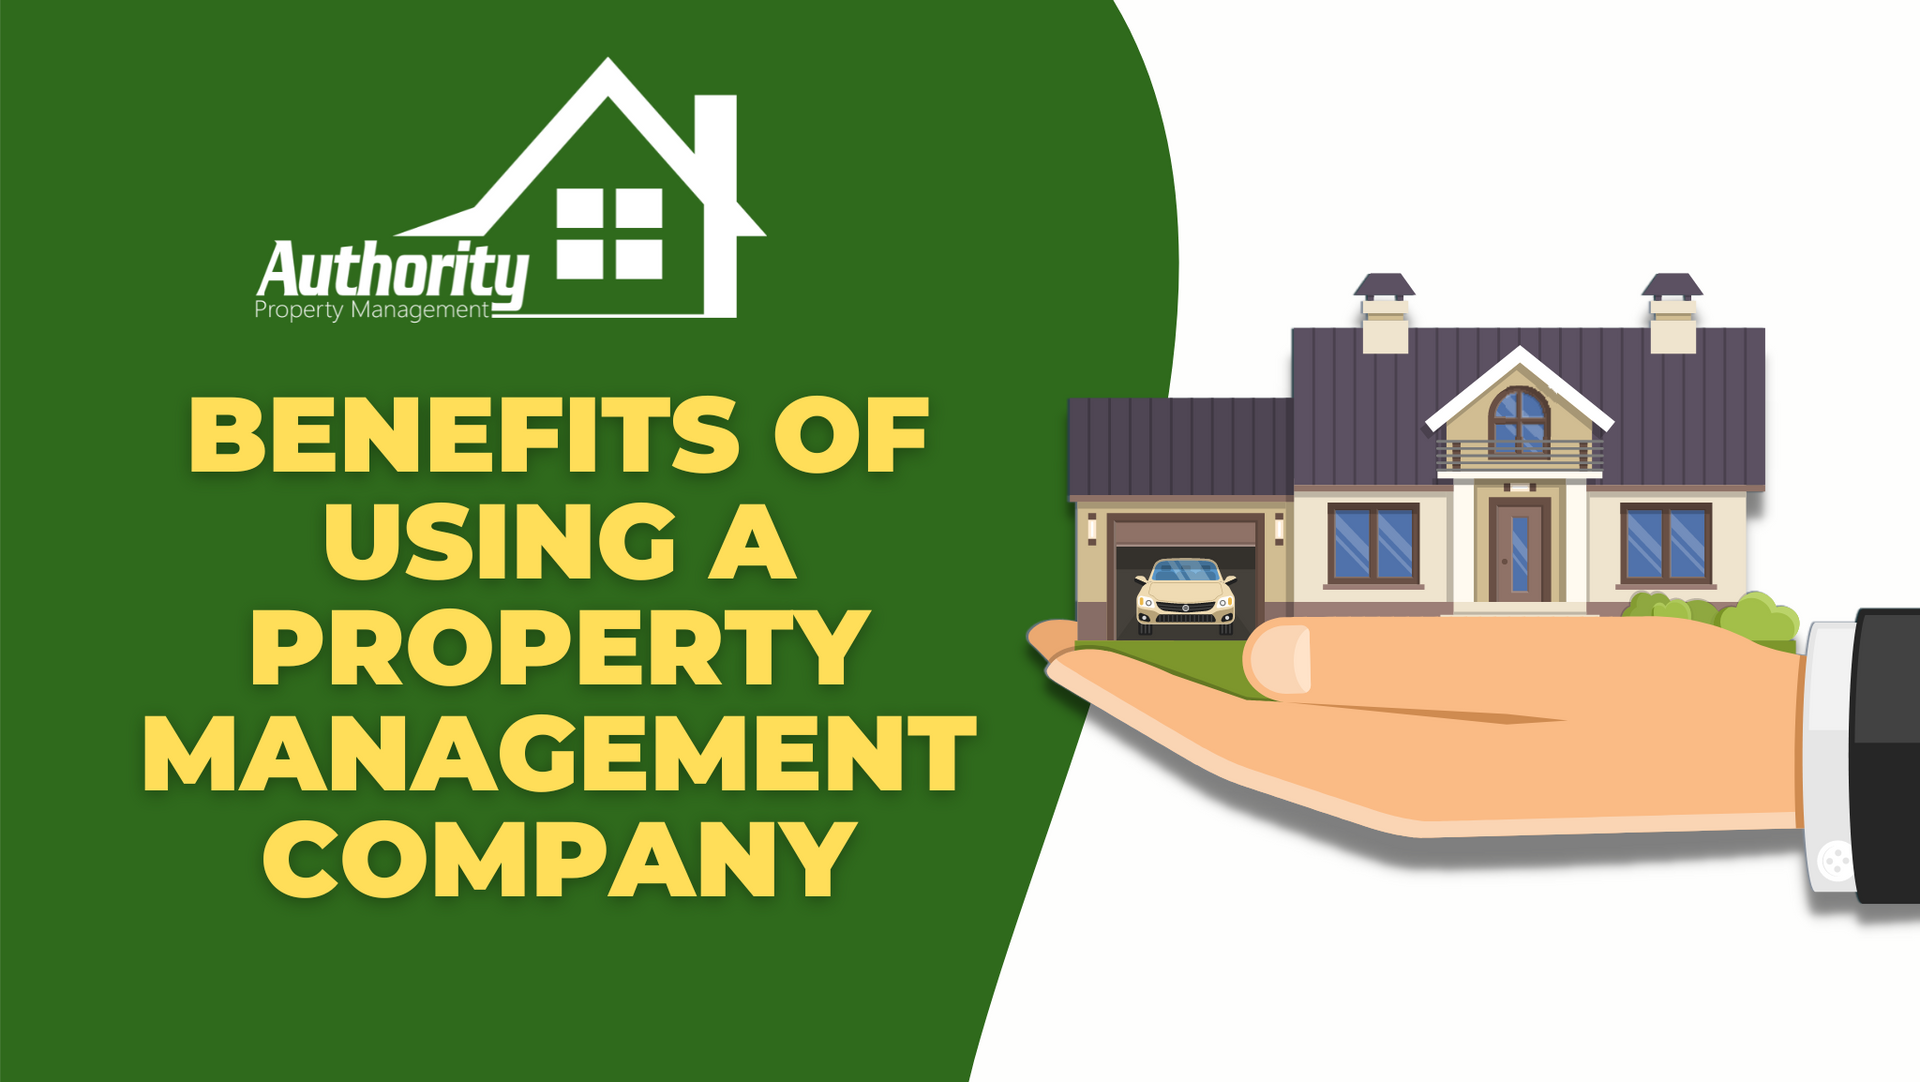 Hand holding miniature house, highlighting property management company benefits